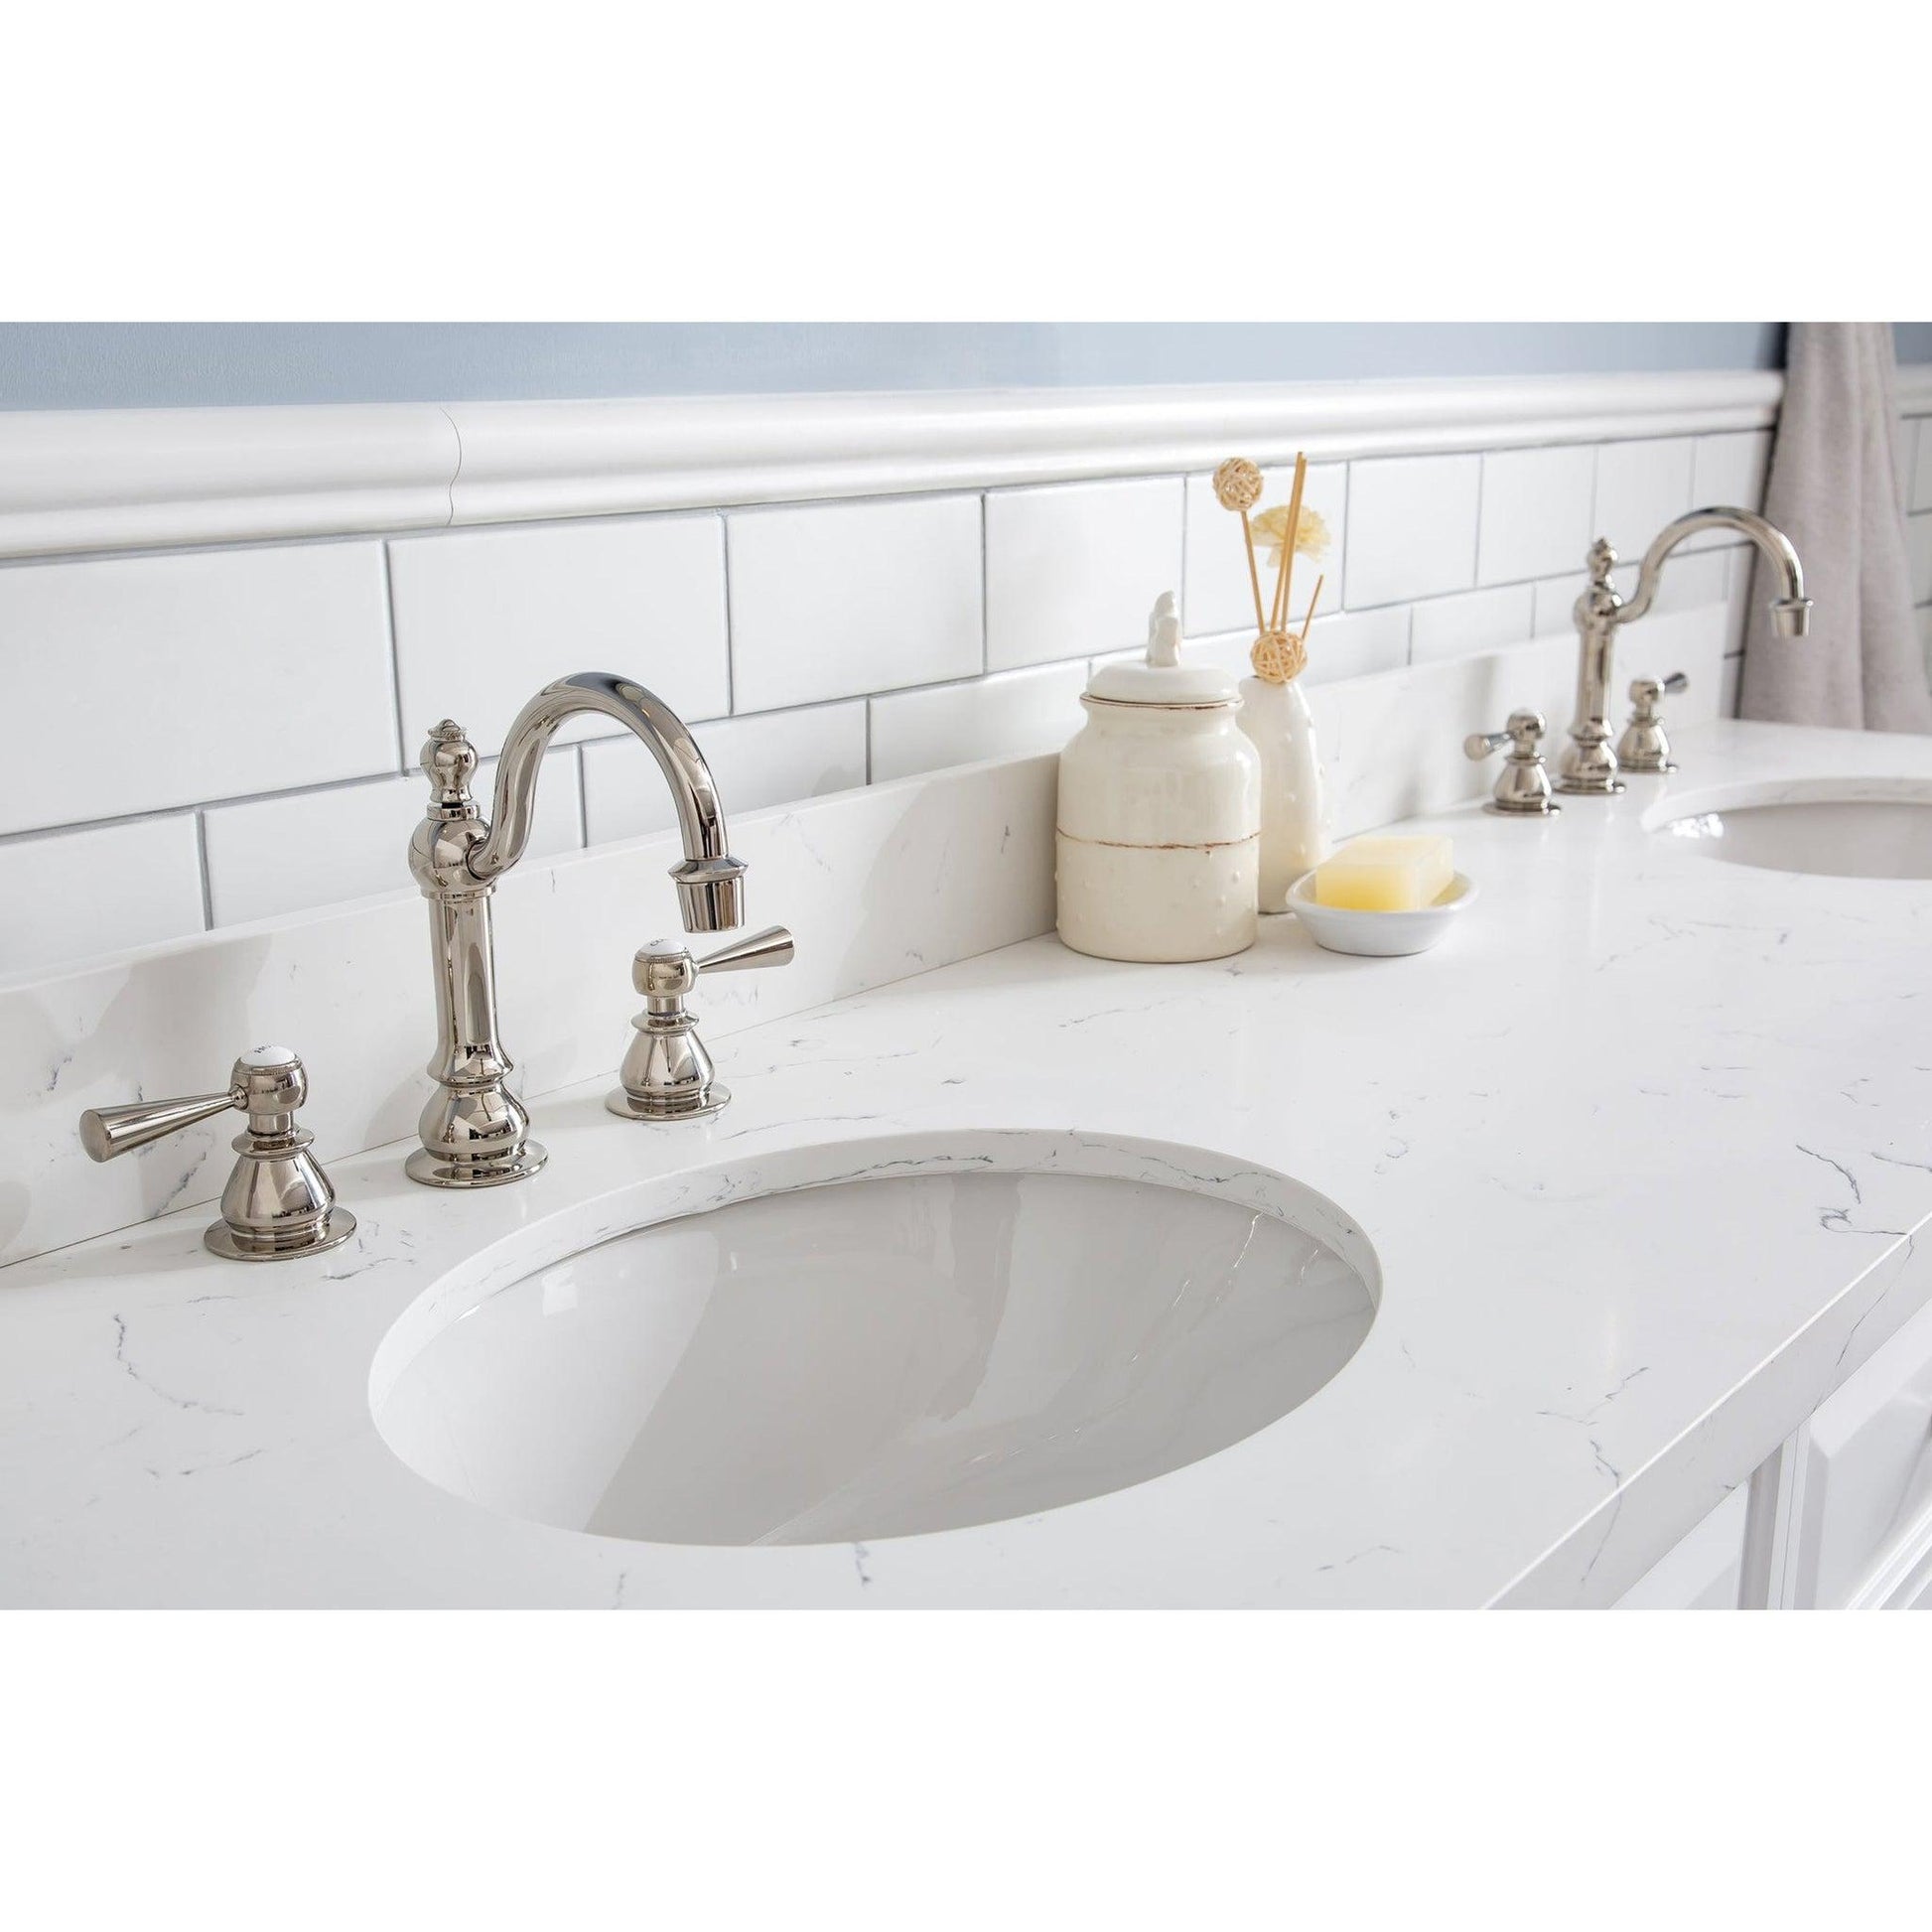 Water Creation Palace 72" Quartz Carrara Pure White Bathroom Vanity Set With Hardware And F2-0012 Faucets, Mirror in Polished Nickel (PVD) Finish